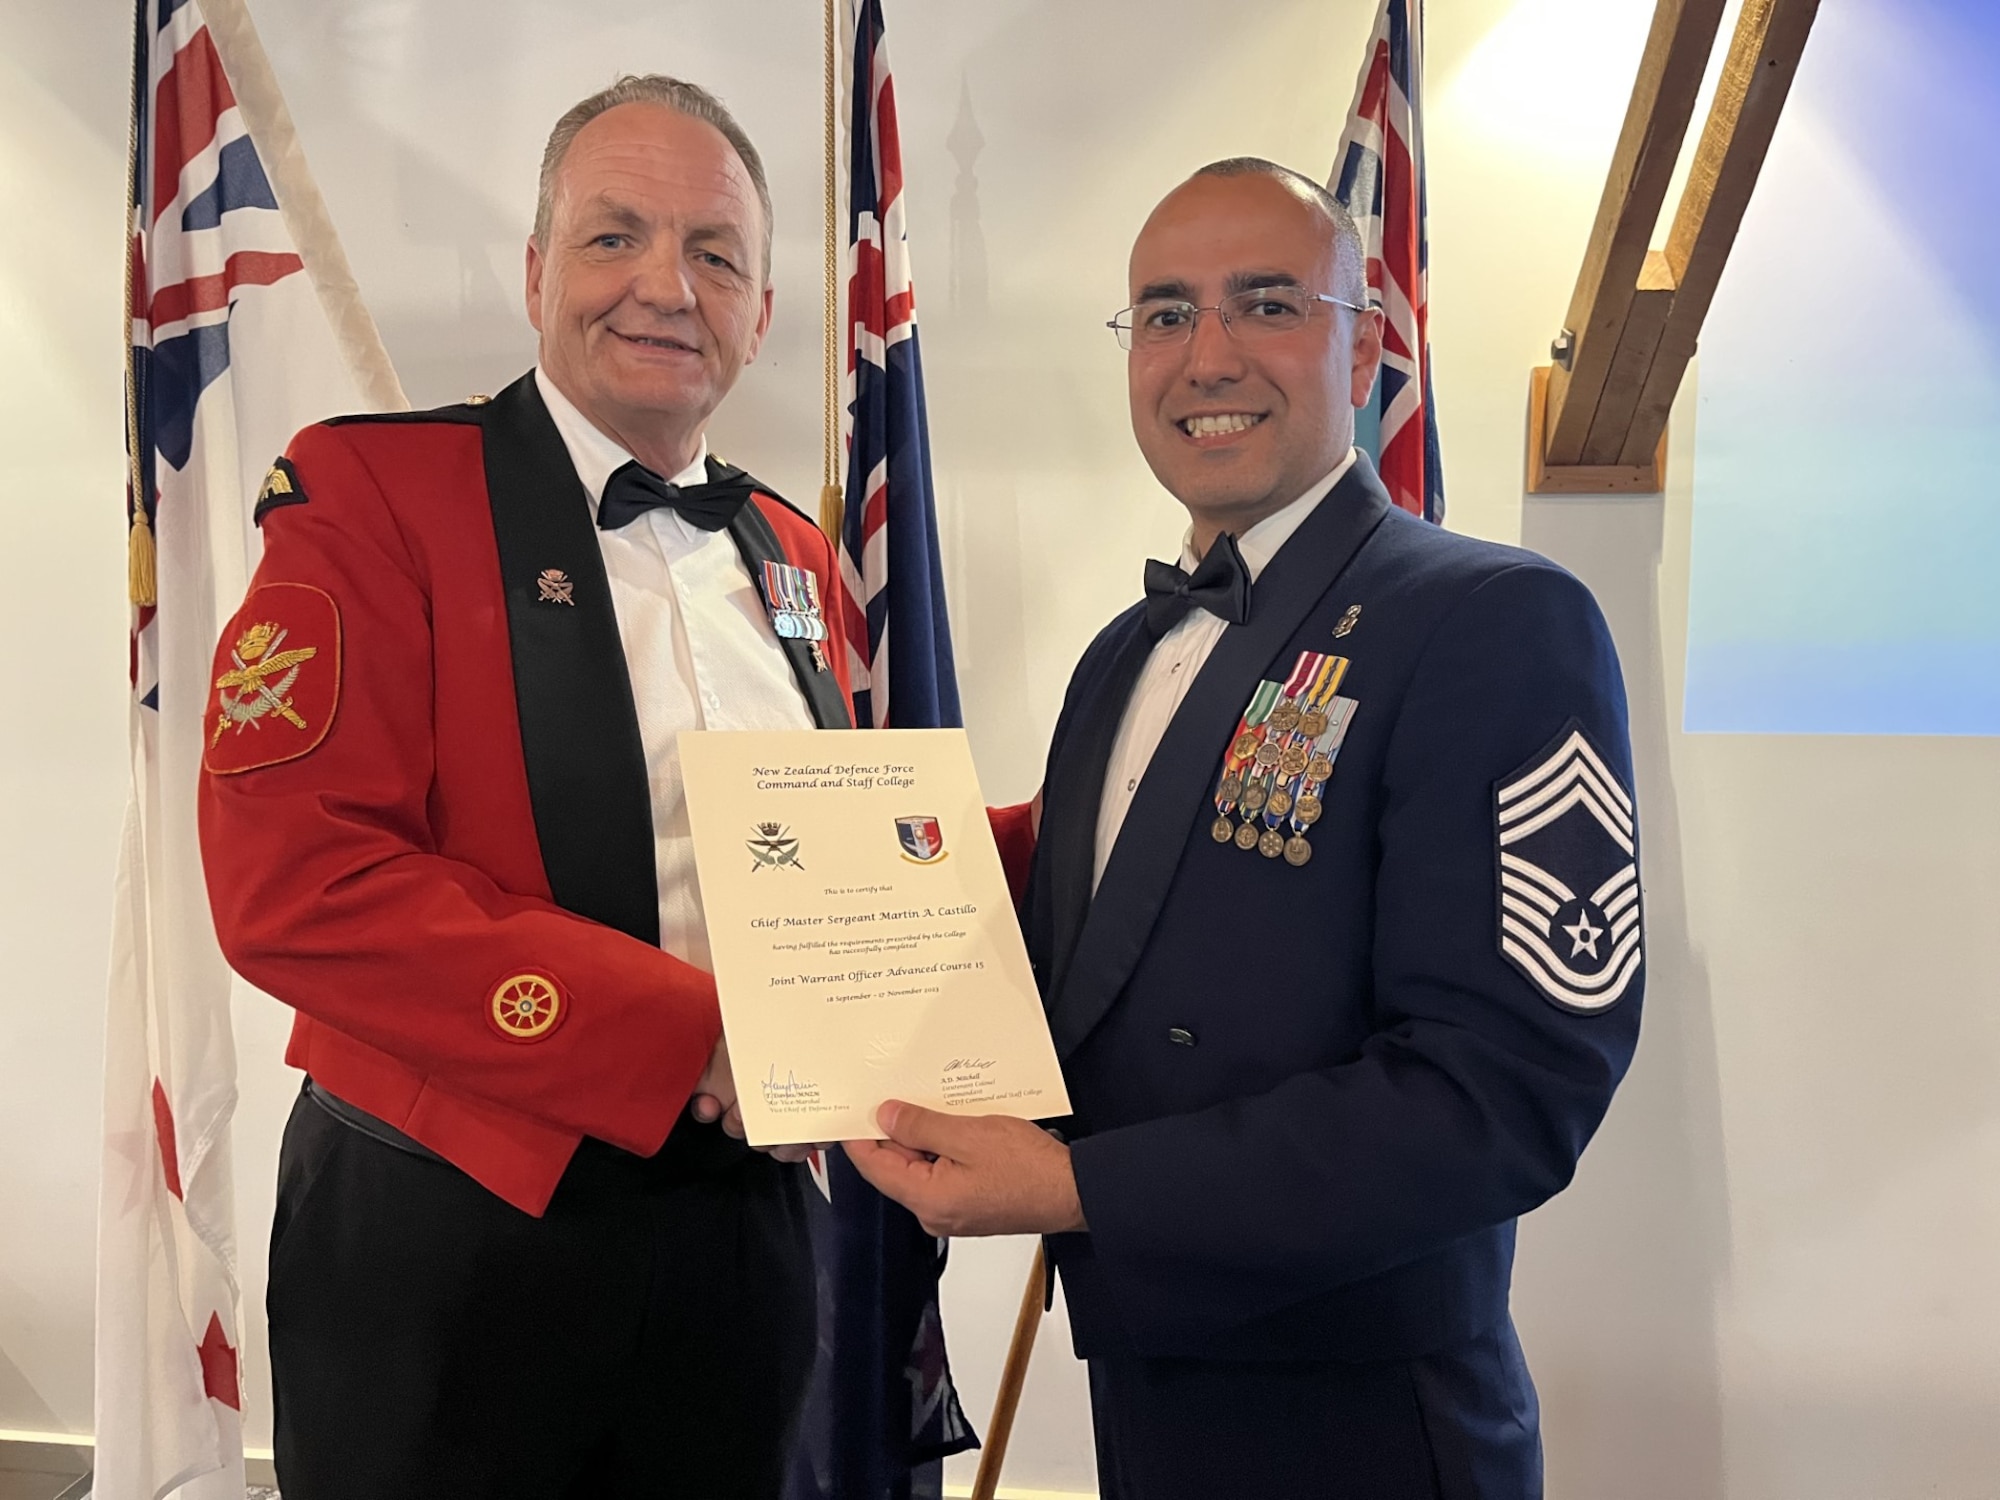 U.S. Air Force Chief Master Sgt. Martin Castillo (right) with the 673rd Medical Group, poses with Warrant Officer Class One Mark Mortiboy, Warrant Officer of the Defence Force (left) after completing New Zealand Defence Force Joint Warrant Officer Advance Course at the NZDF College Nov. 18, 2023. The academically rigorous course included visits to Hawaii’s U.S.'s Indo-Pacific Command and Asia-Pacific Center for Security Studies, and New Caledonia, a French territory in the southwest Pacific, to better understand Indo-Pacific concerns.